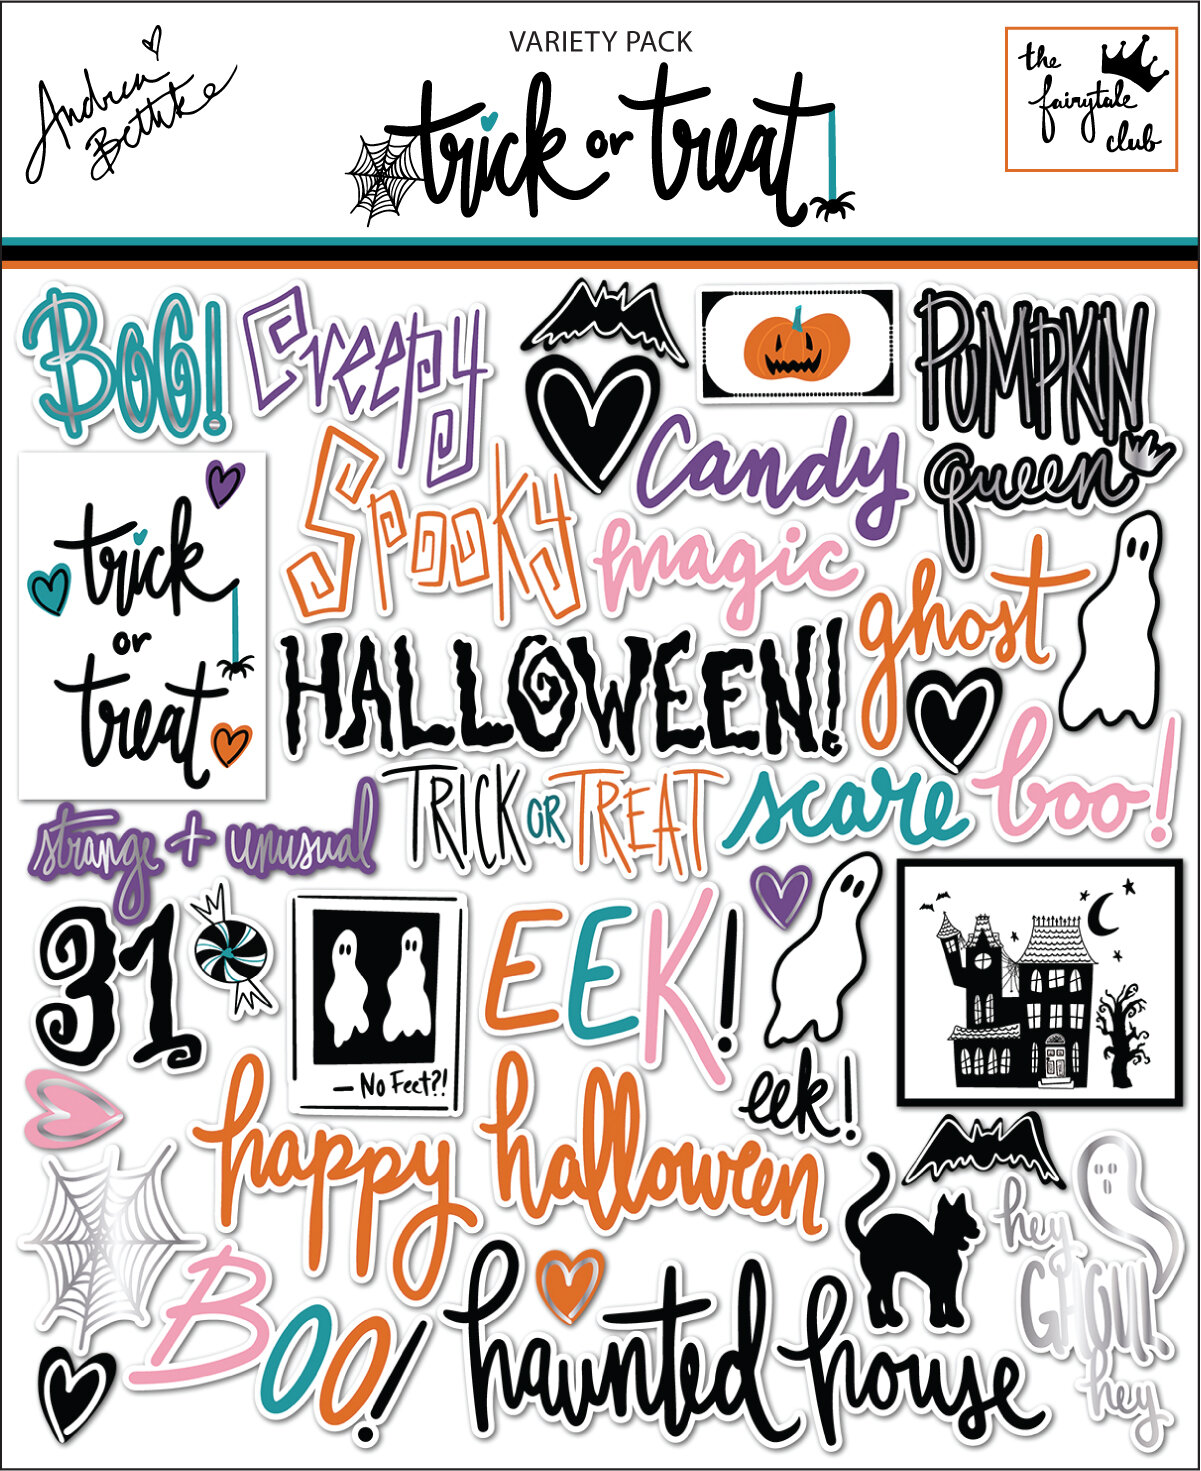 Trick or Treat - Variety Pack with top piece-06.jpg